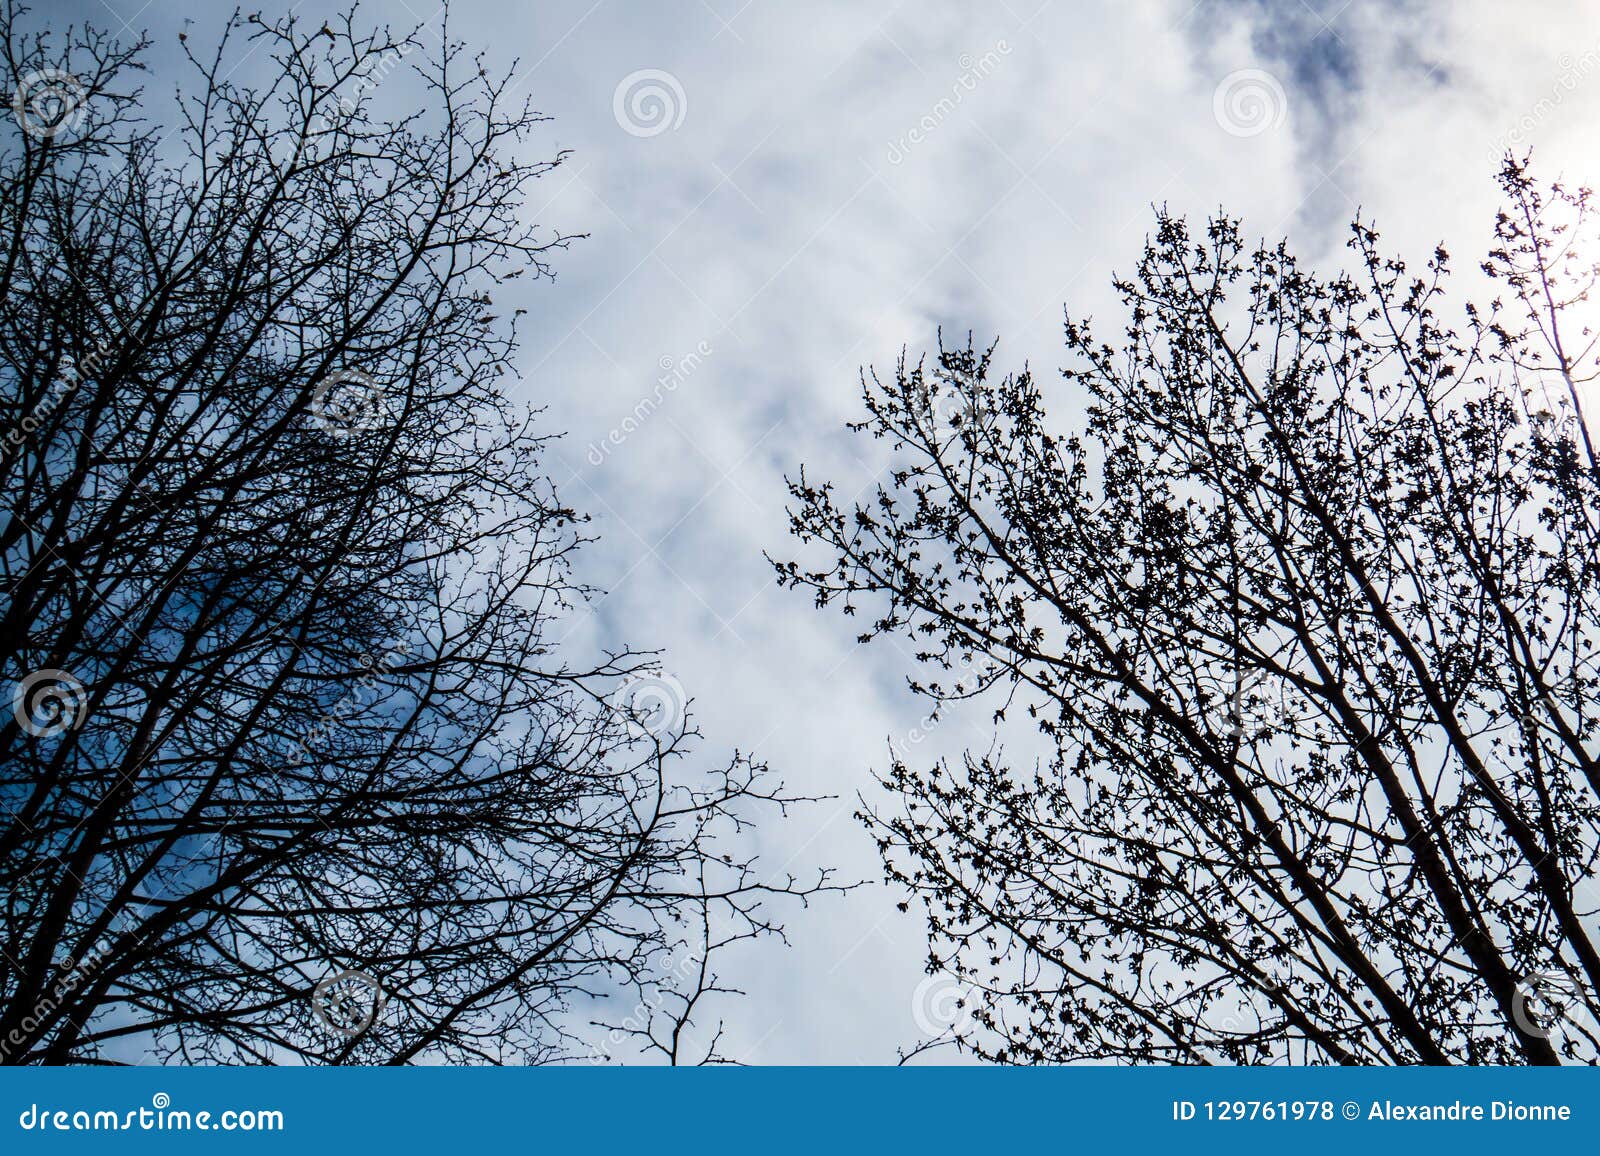 Cloudy Sky and Leafless Spring Trees Stock Photo - Image of silhouette ...